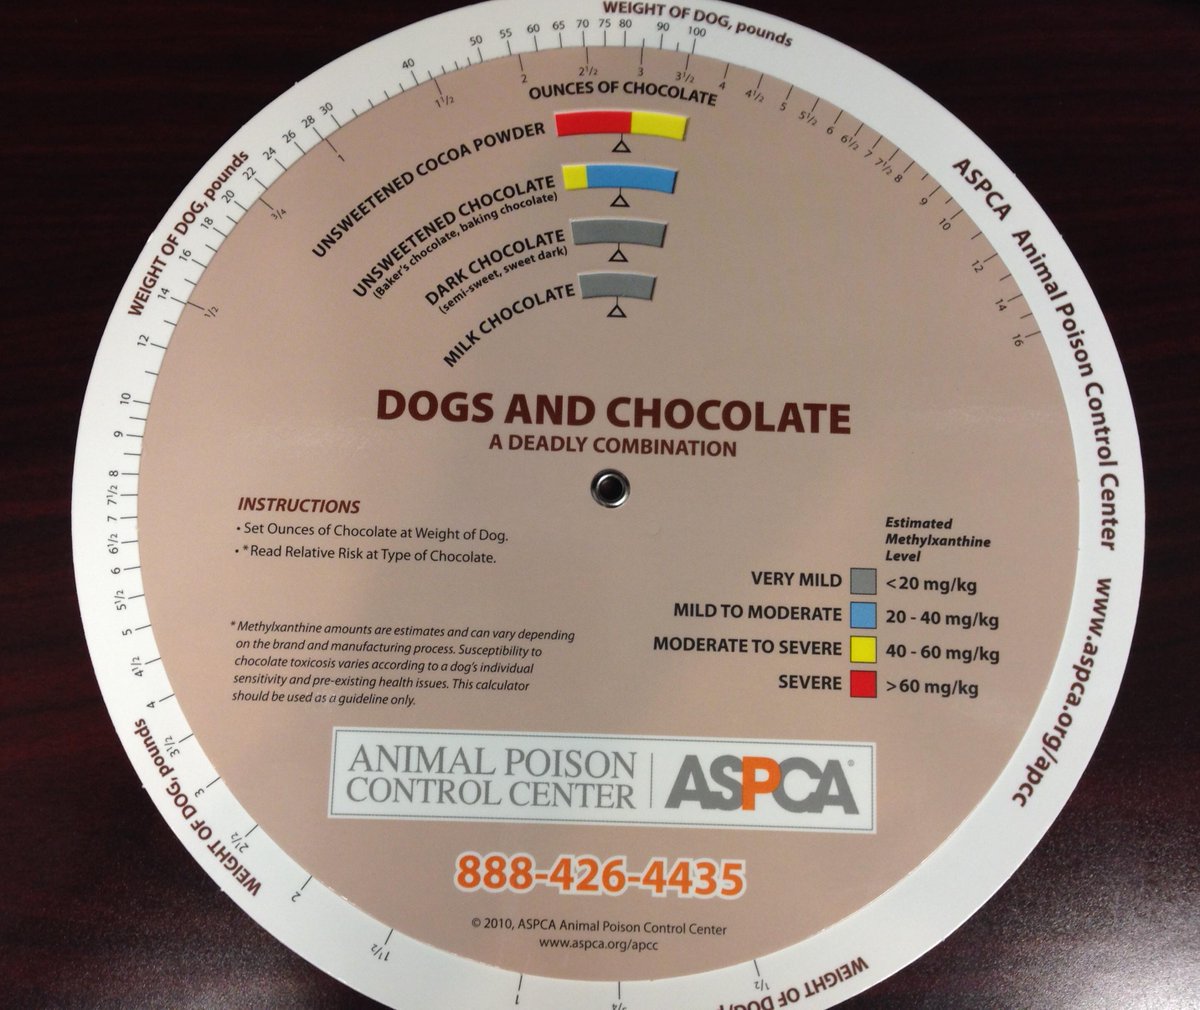 Aspca Animal Poison Control Center Attending Iveccs This Weekend In Dc Stop By Our Booth And Get Your Free Chocolate Wheel Http T Co 7ejgjvd4wx